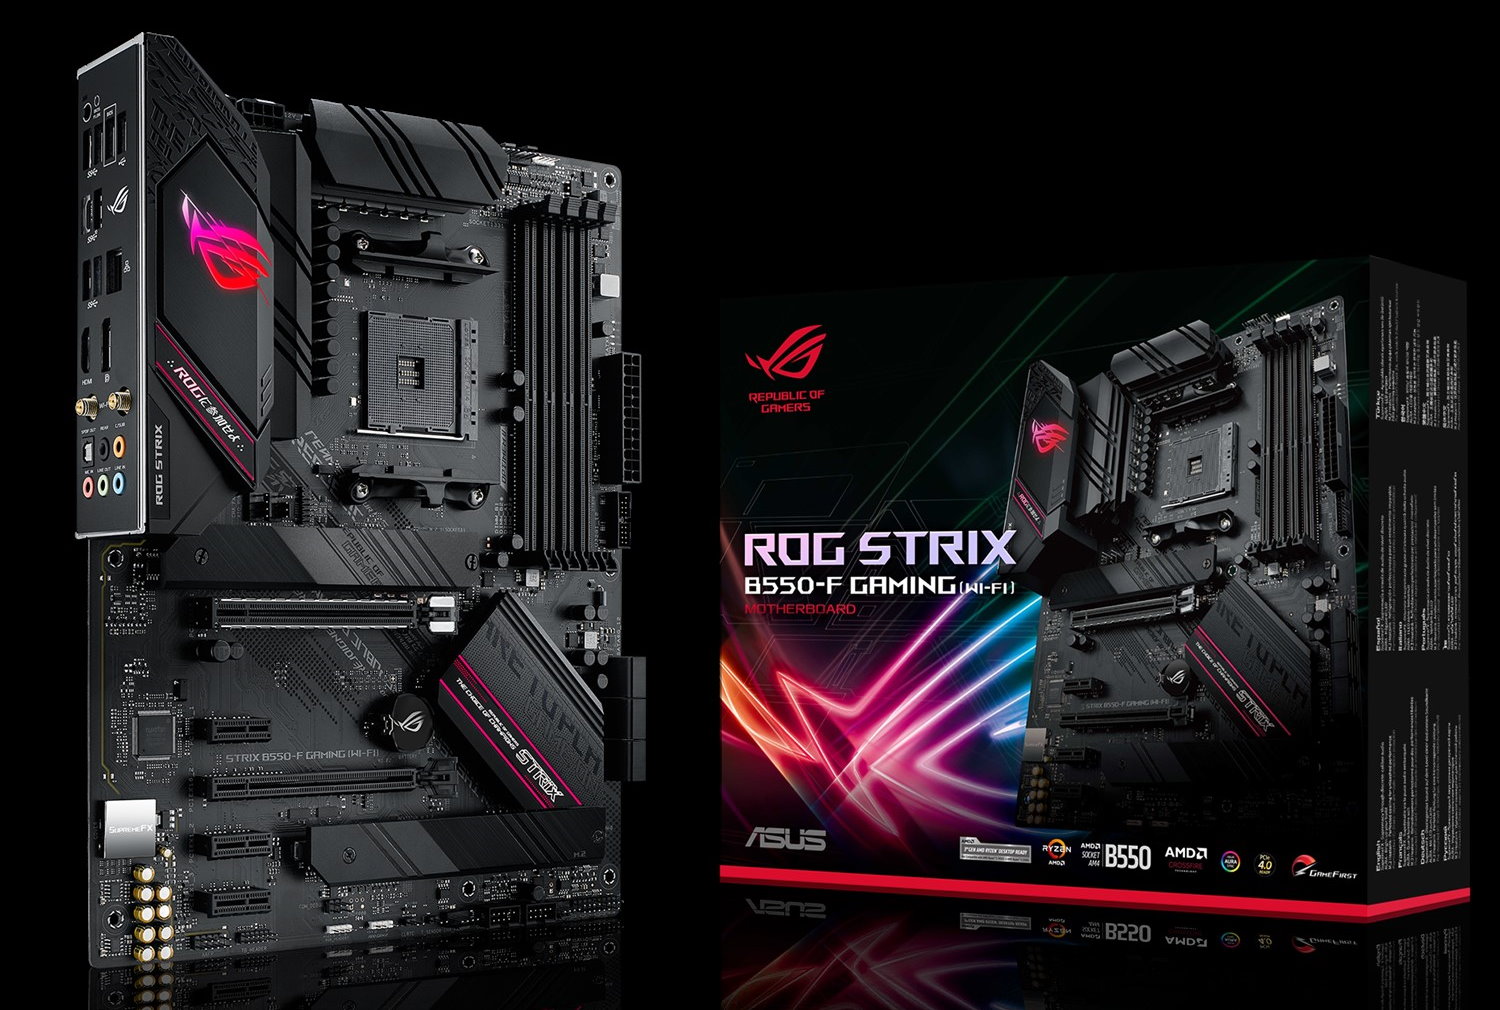 Asus ROG Strix B550-F Gaming Wi-Fi Review: Reasonable Price, Well 